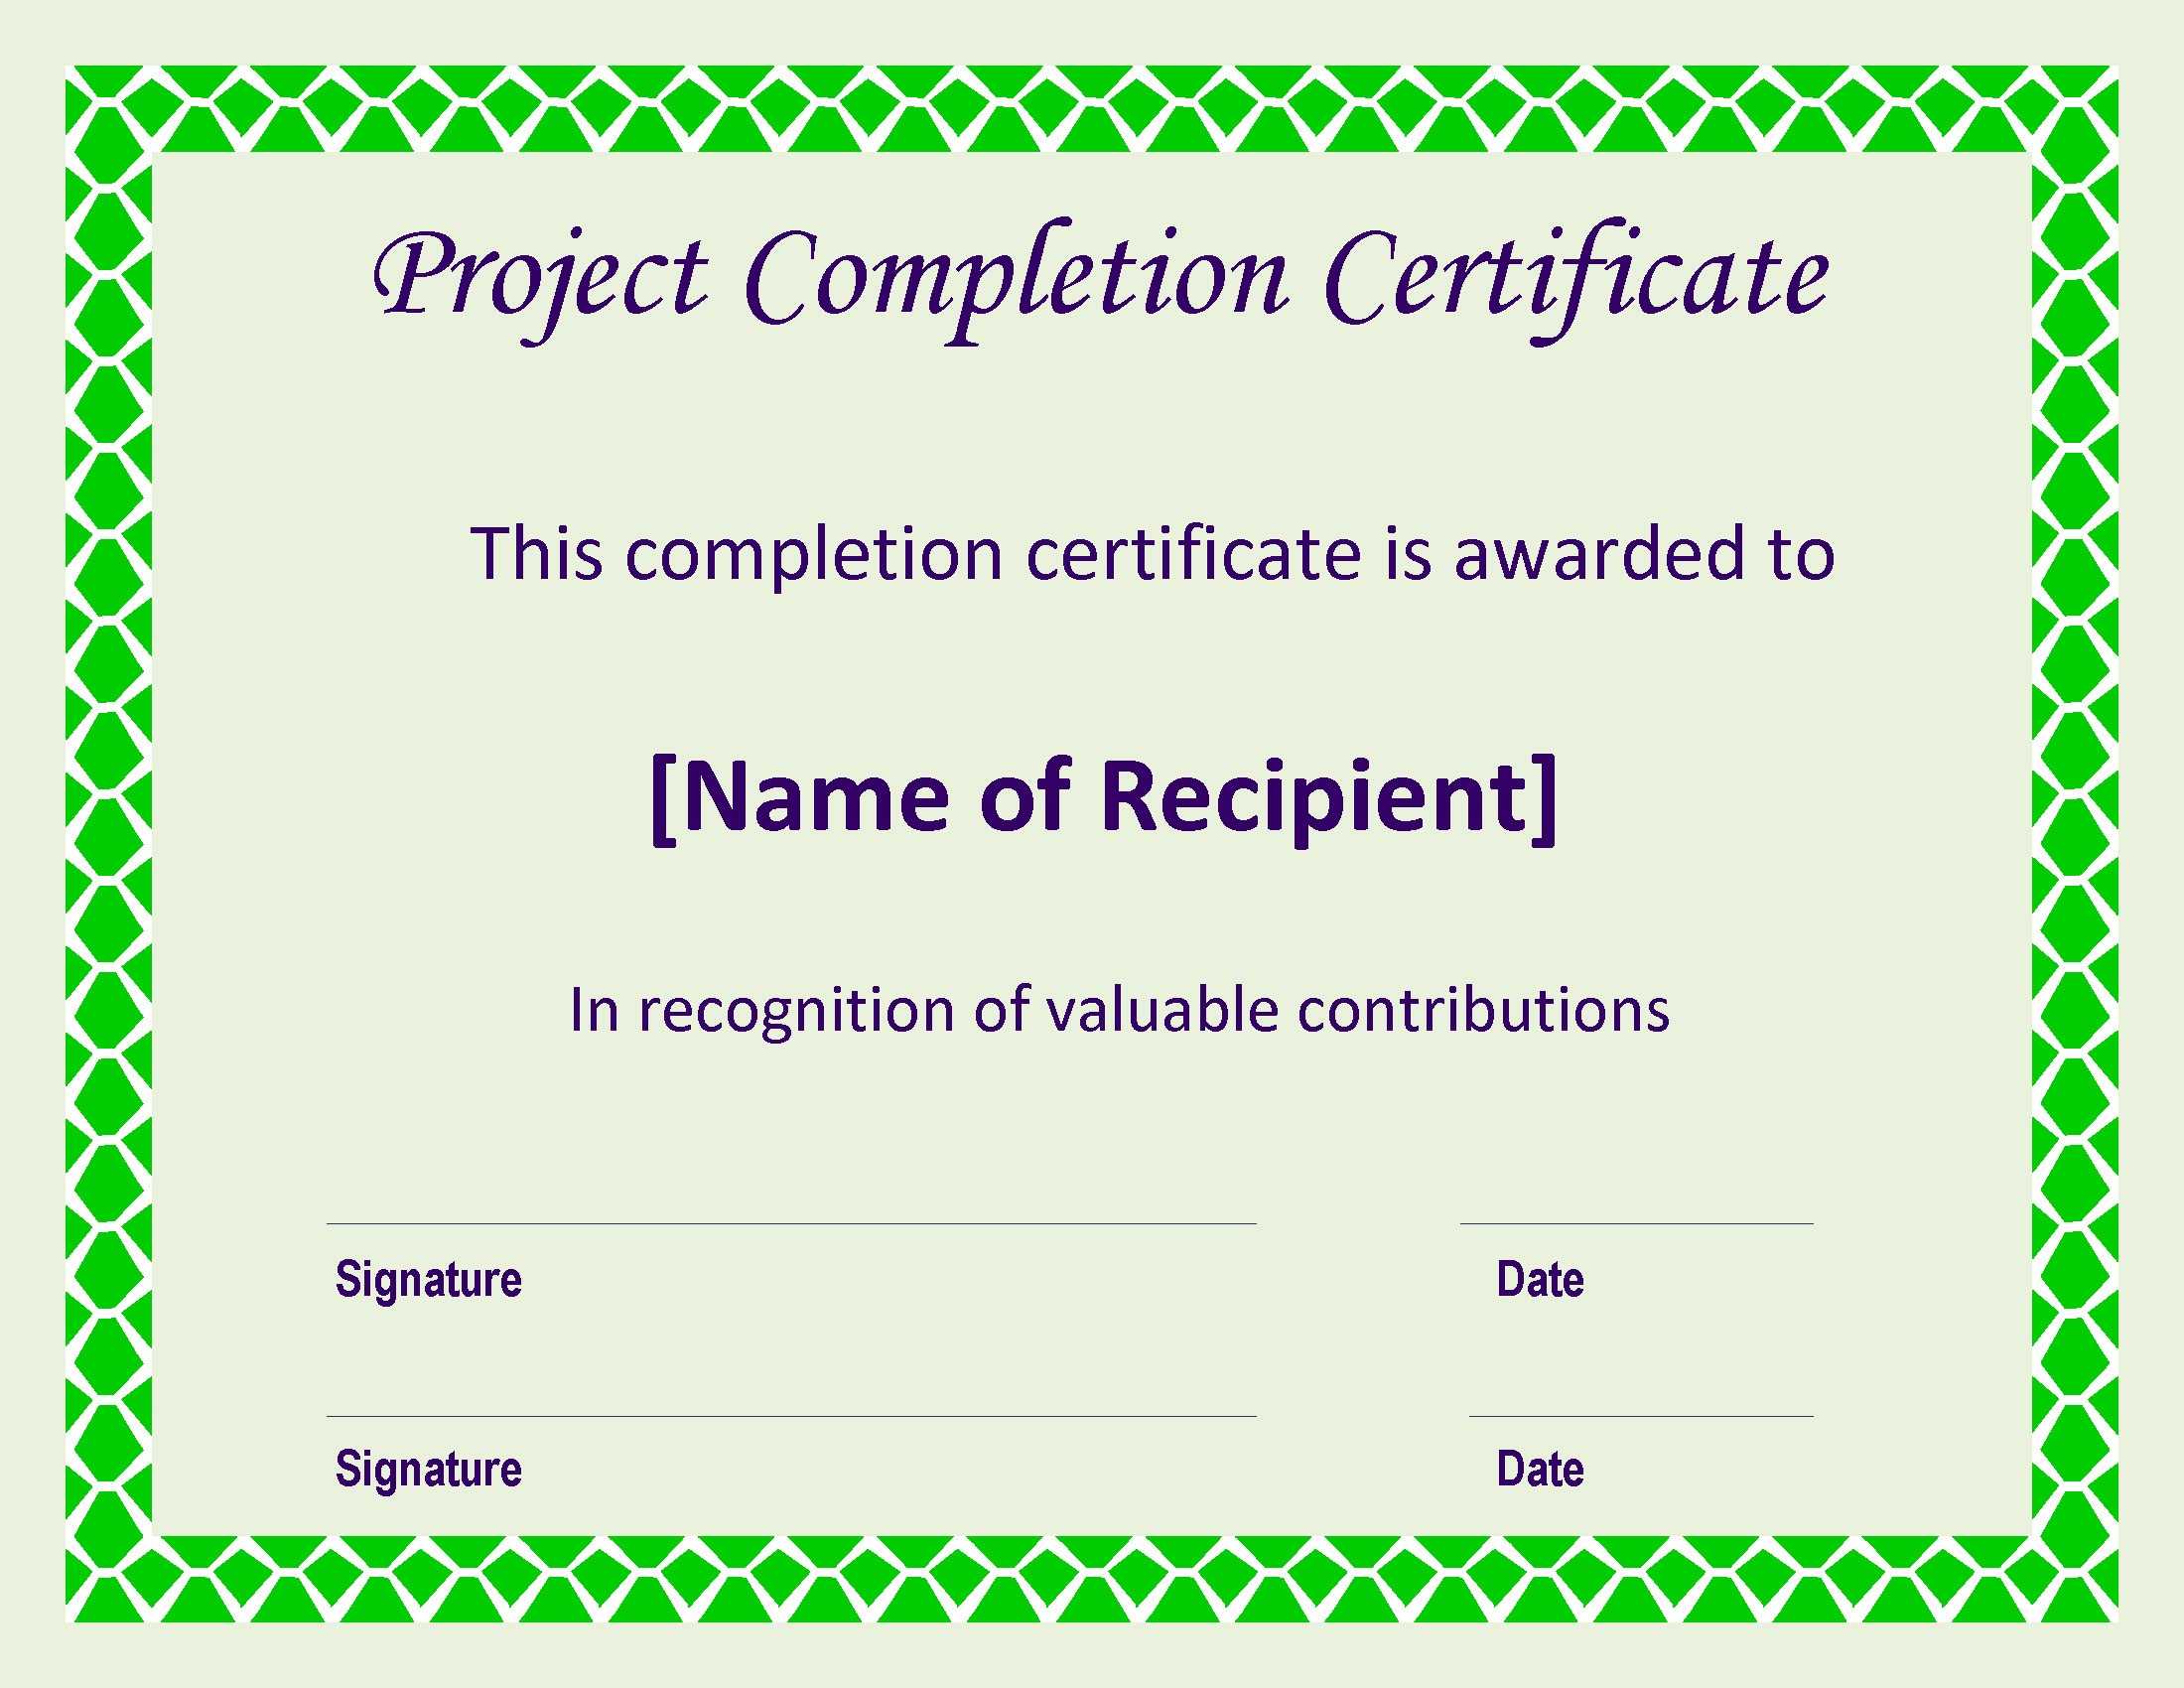 Certificate Sample For Project - Calep.midnightpig.co Intended For Certificate Template For Project Completion